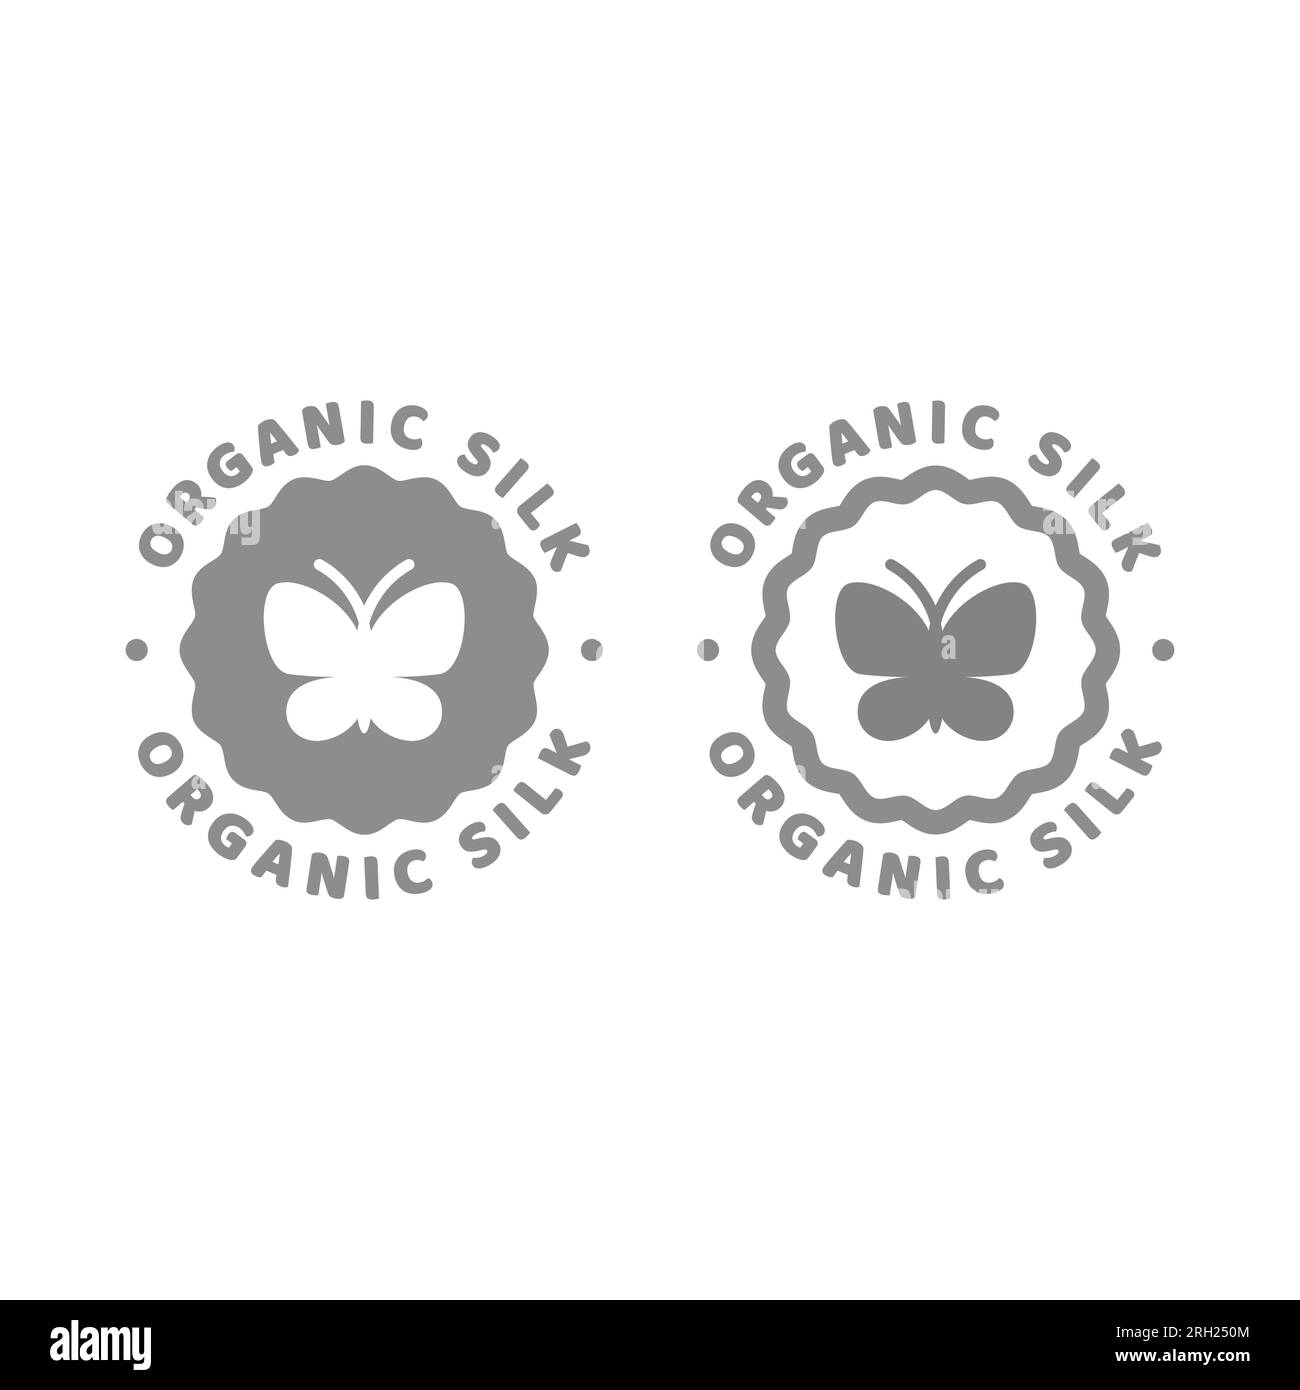 Organic silk vector label. Icon for fabric or material. Stock Vector